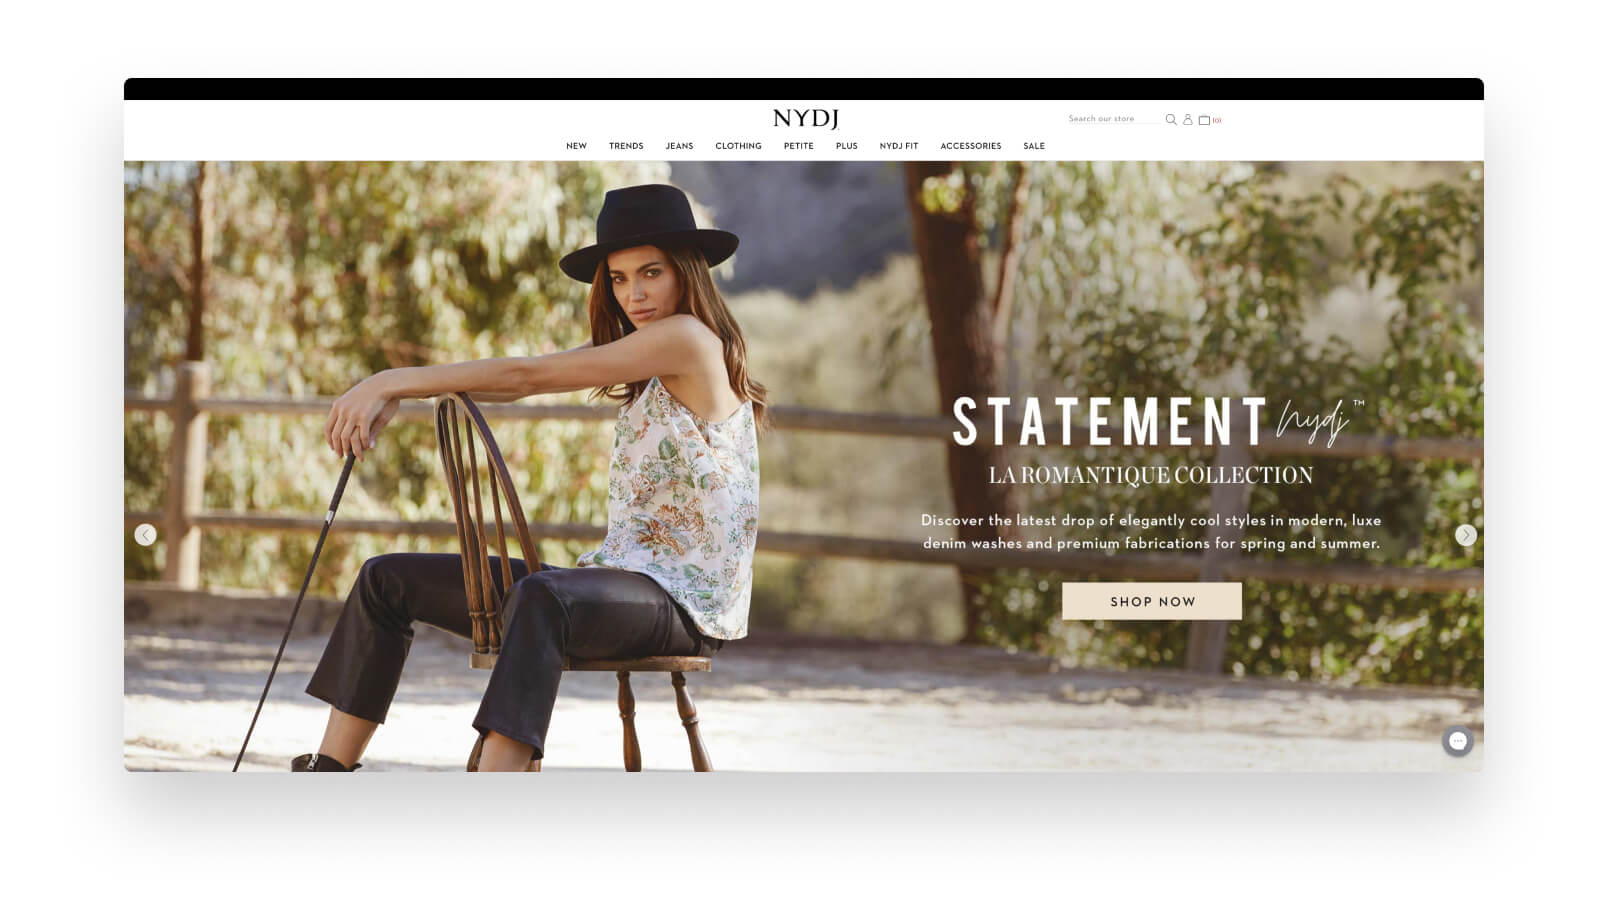 The front page of the NYDJ online store with a female model sitting on a chair.